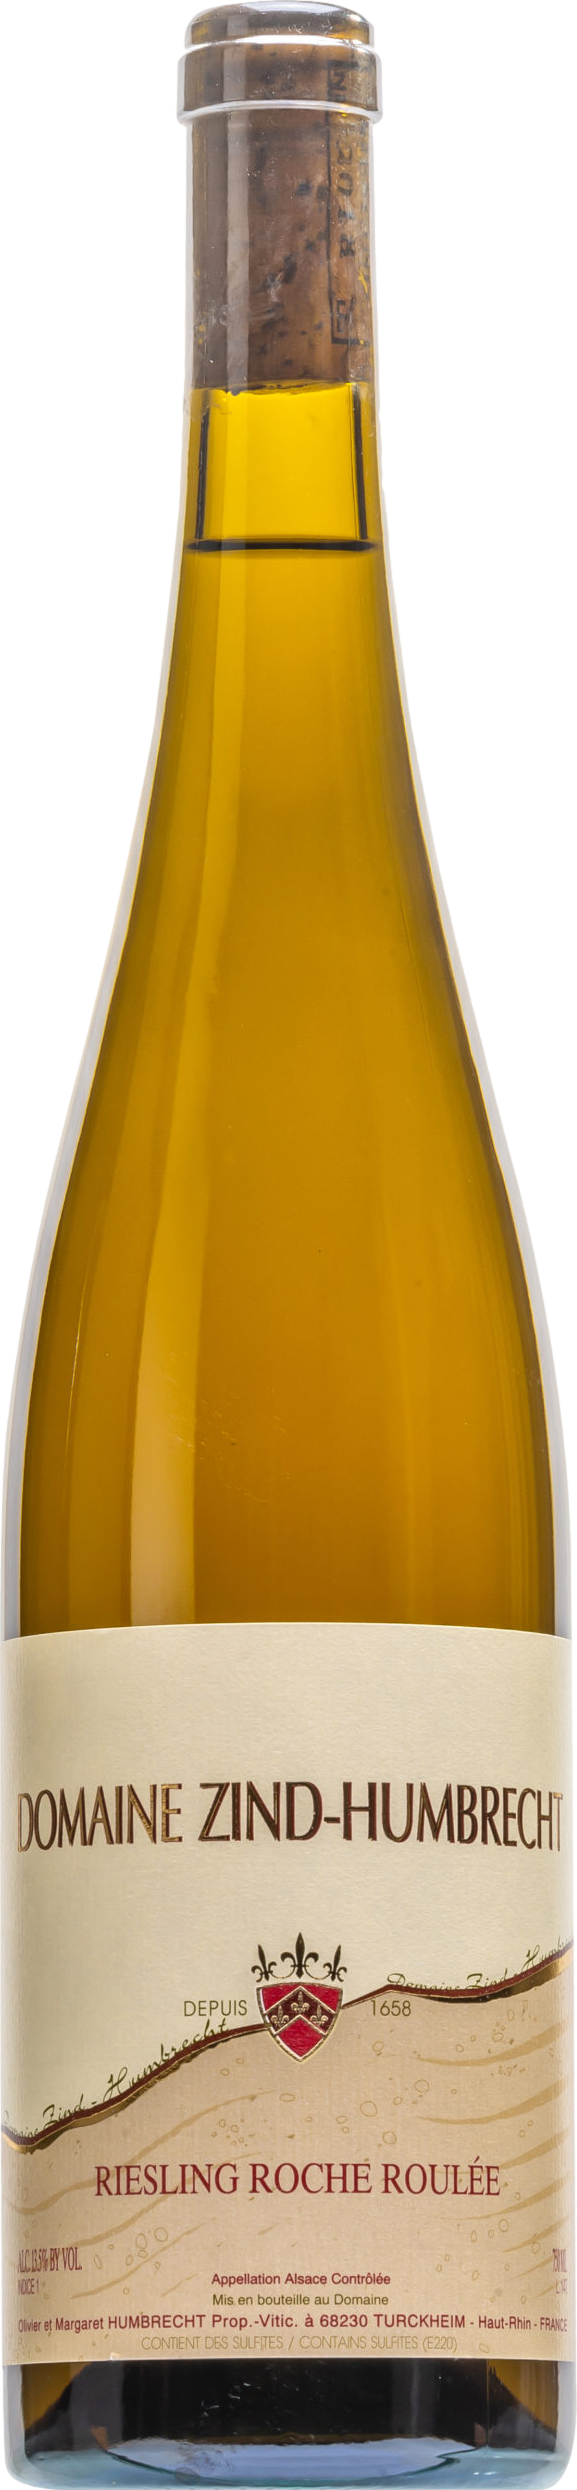 Domaine Zind-Humbrecht Riesling Roche Roulee 2019 Domaine Zind-Humbrecht 8wines DACH